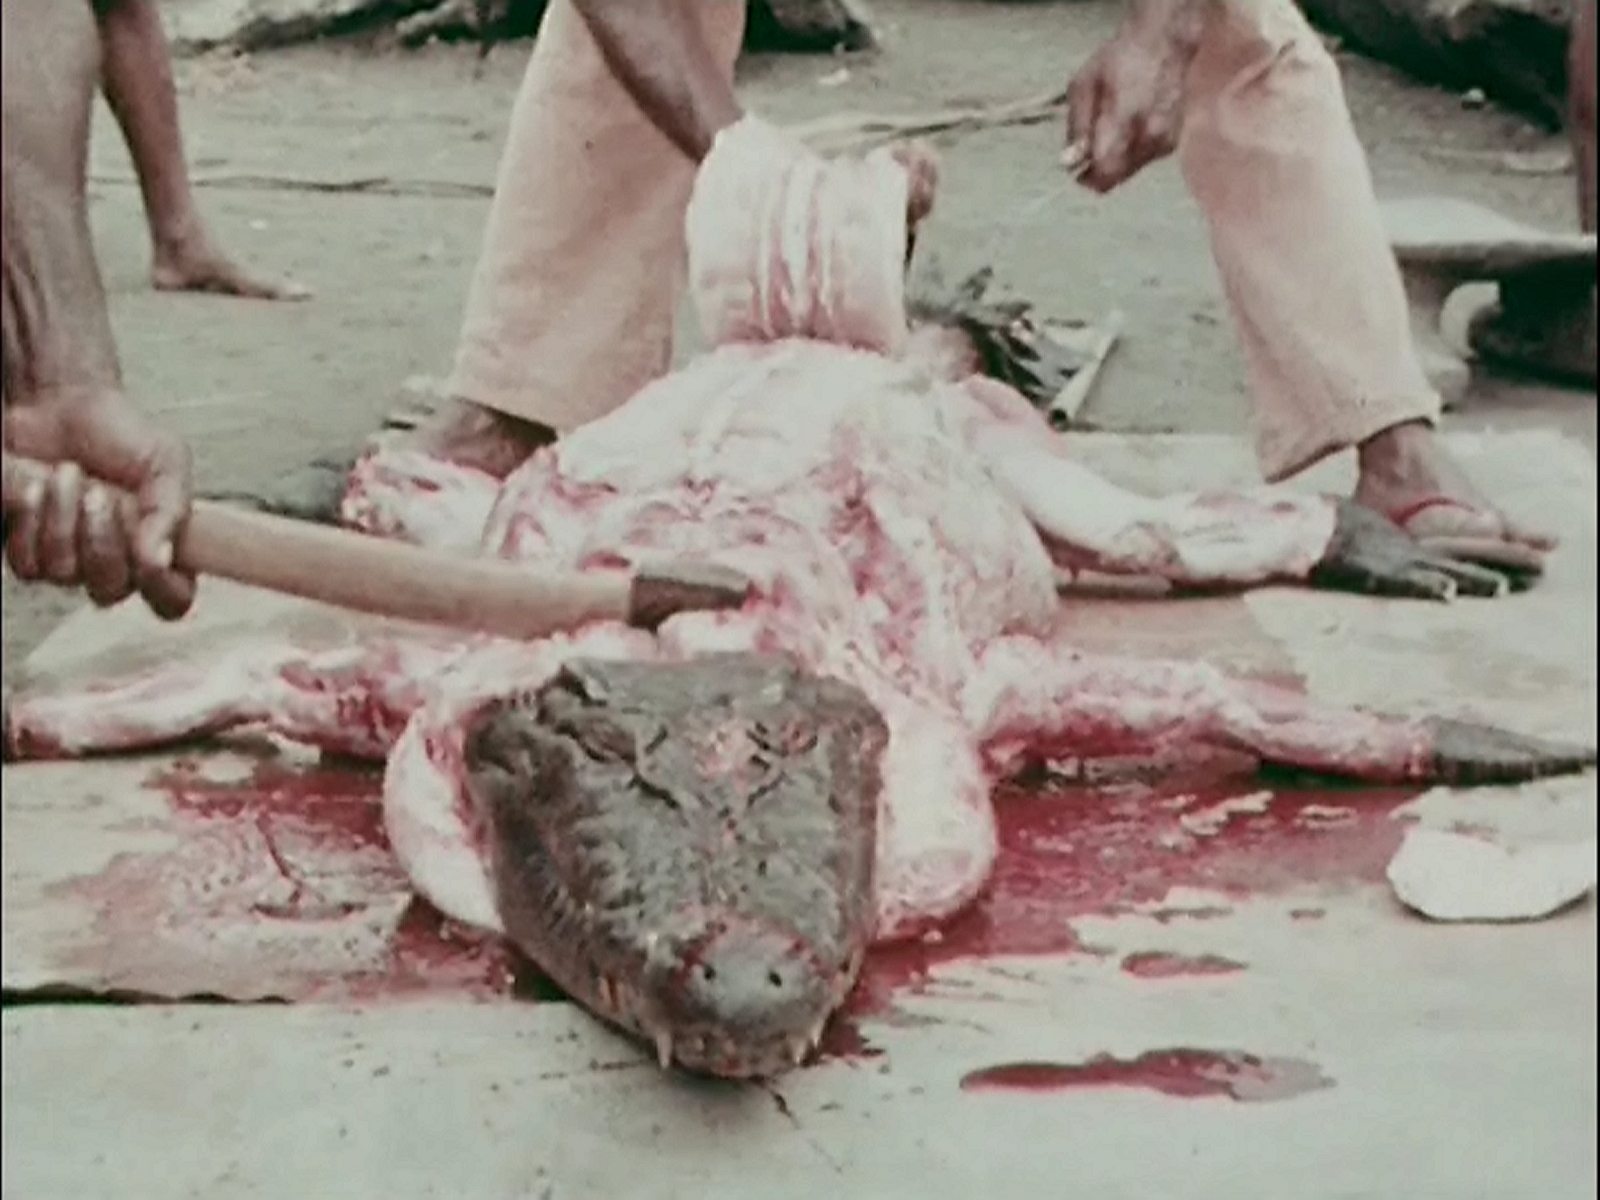 http://sinsofcinema.com/Images/Real%20Cannibal%20Holocaust/Real%20Cannibal%20Holocaust%20DVD%20One7%20Movies.jpg